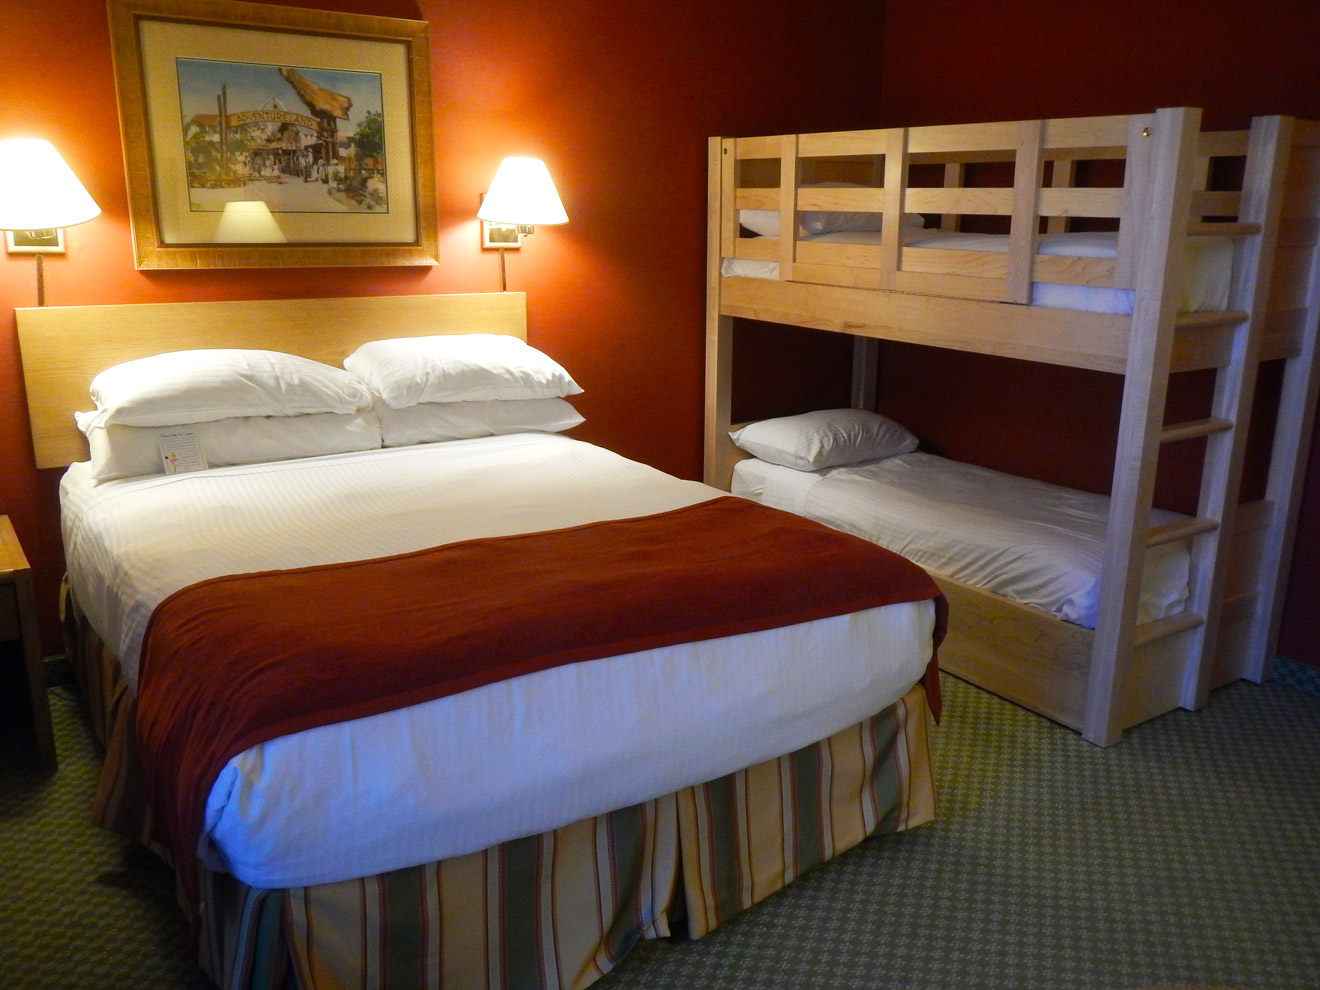 Howard Johnson Anaheim Hotel Is Family, Hotels In Anaheim With Bunk Beds